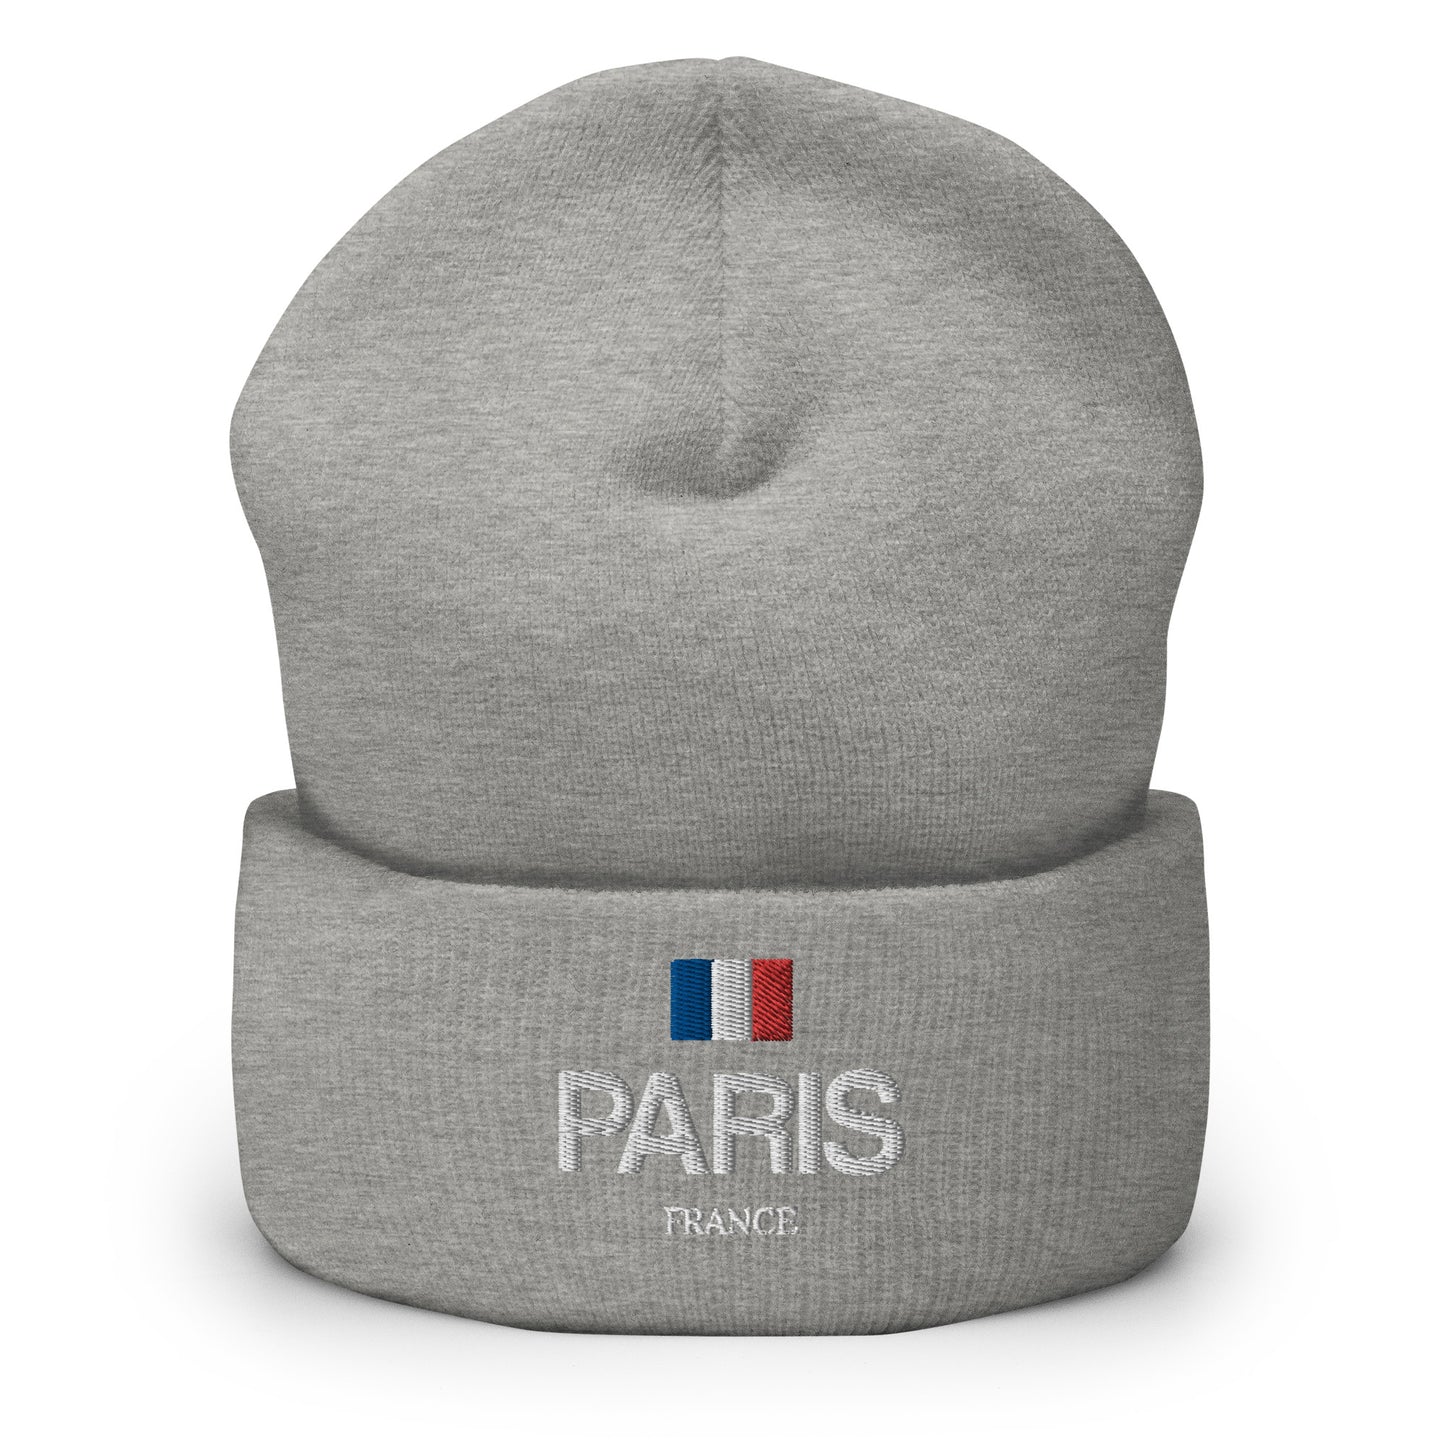 Paris France Embroidered Cuffed Beanie, Vintage City Flag Embroidery Party Men Women Stretchy Winter Adult Aesthetic Cap Hat Gift